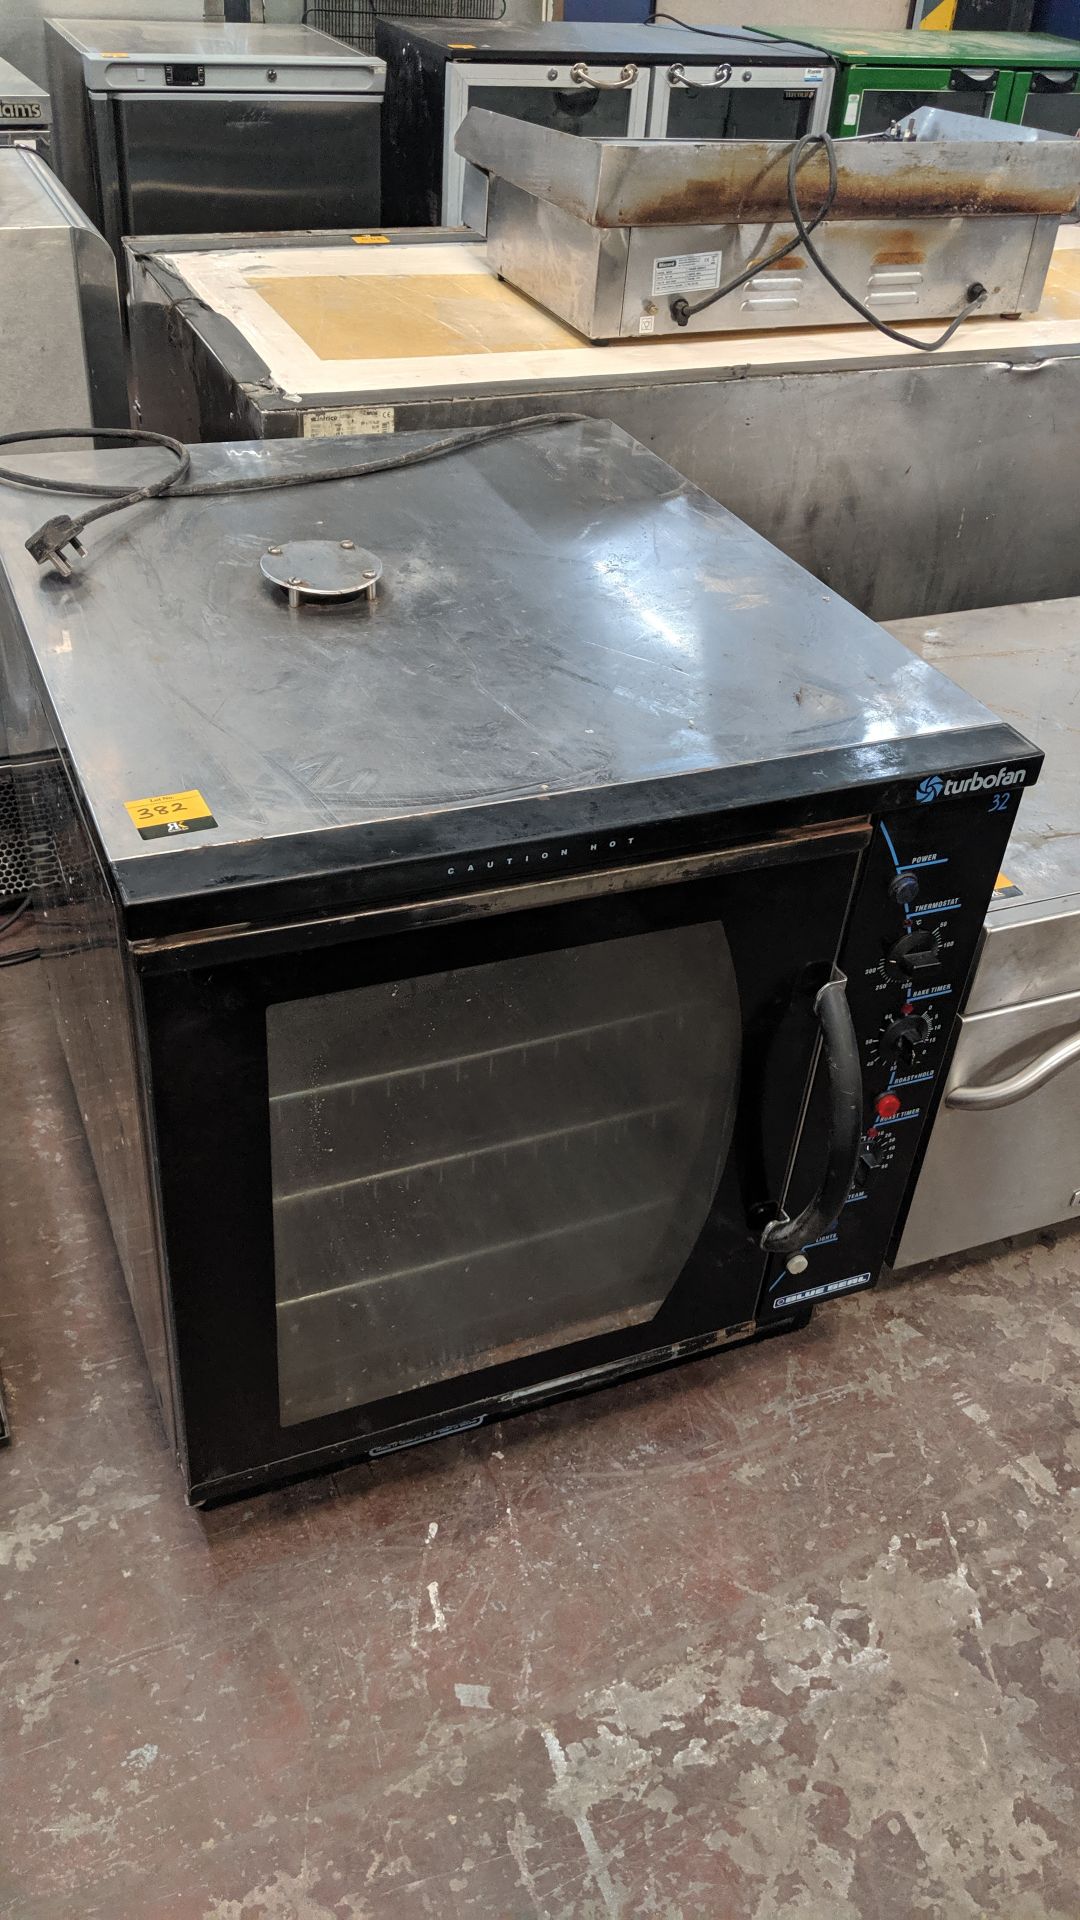 Blue Seal turbo fan 32 oven IMPORTANT: Please remember goods successfully bid upon must be paid - Image 2 of 5